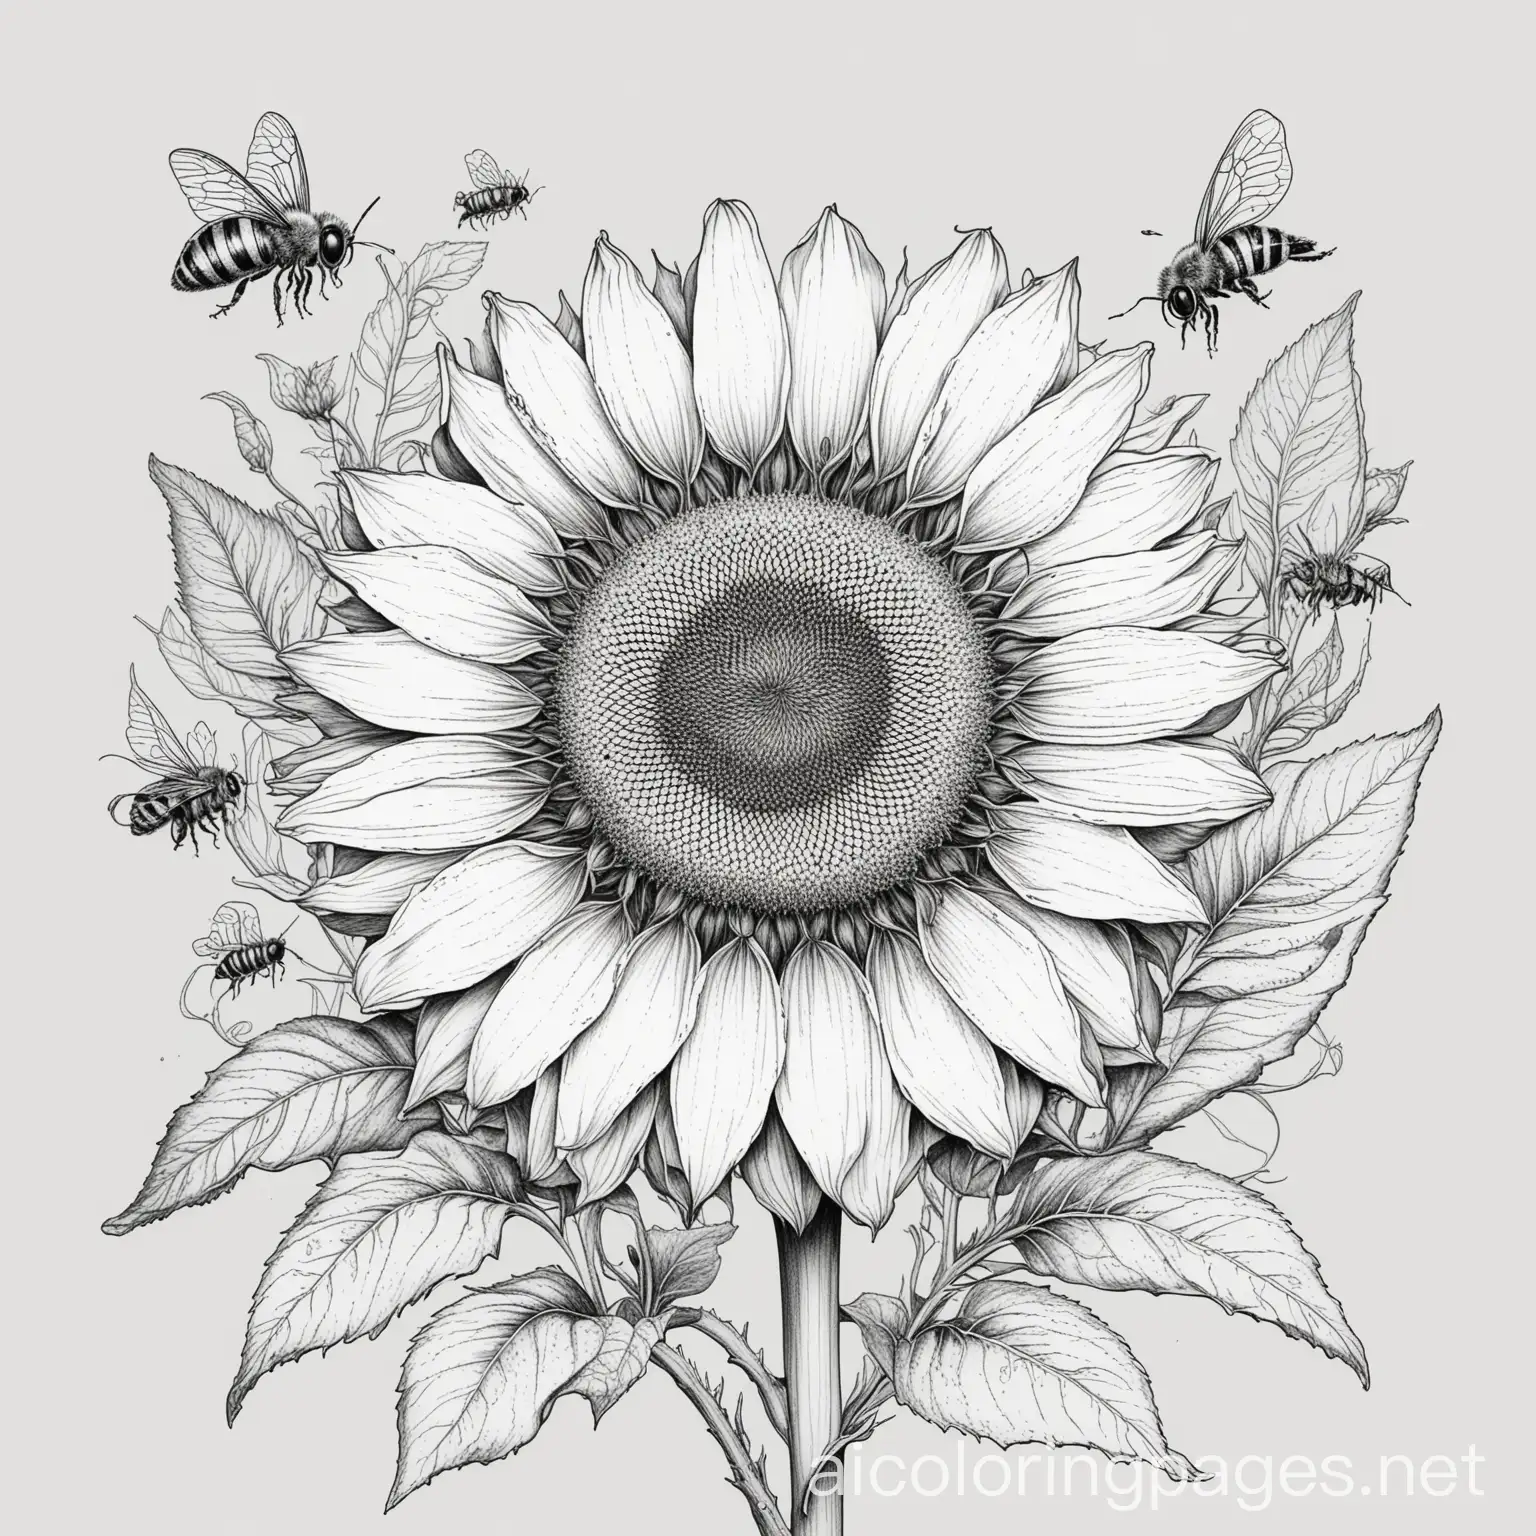 Sunflower-and-Bees-Coloring-Page-Black-and-White-Line-Art-on-White-Background